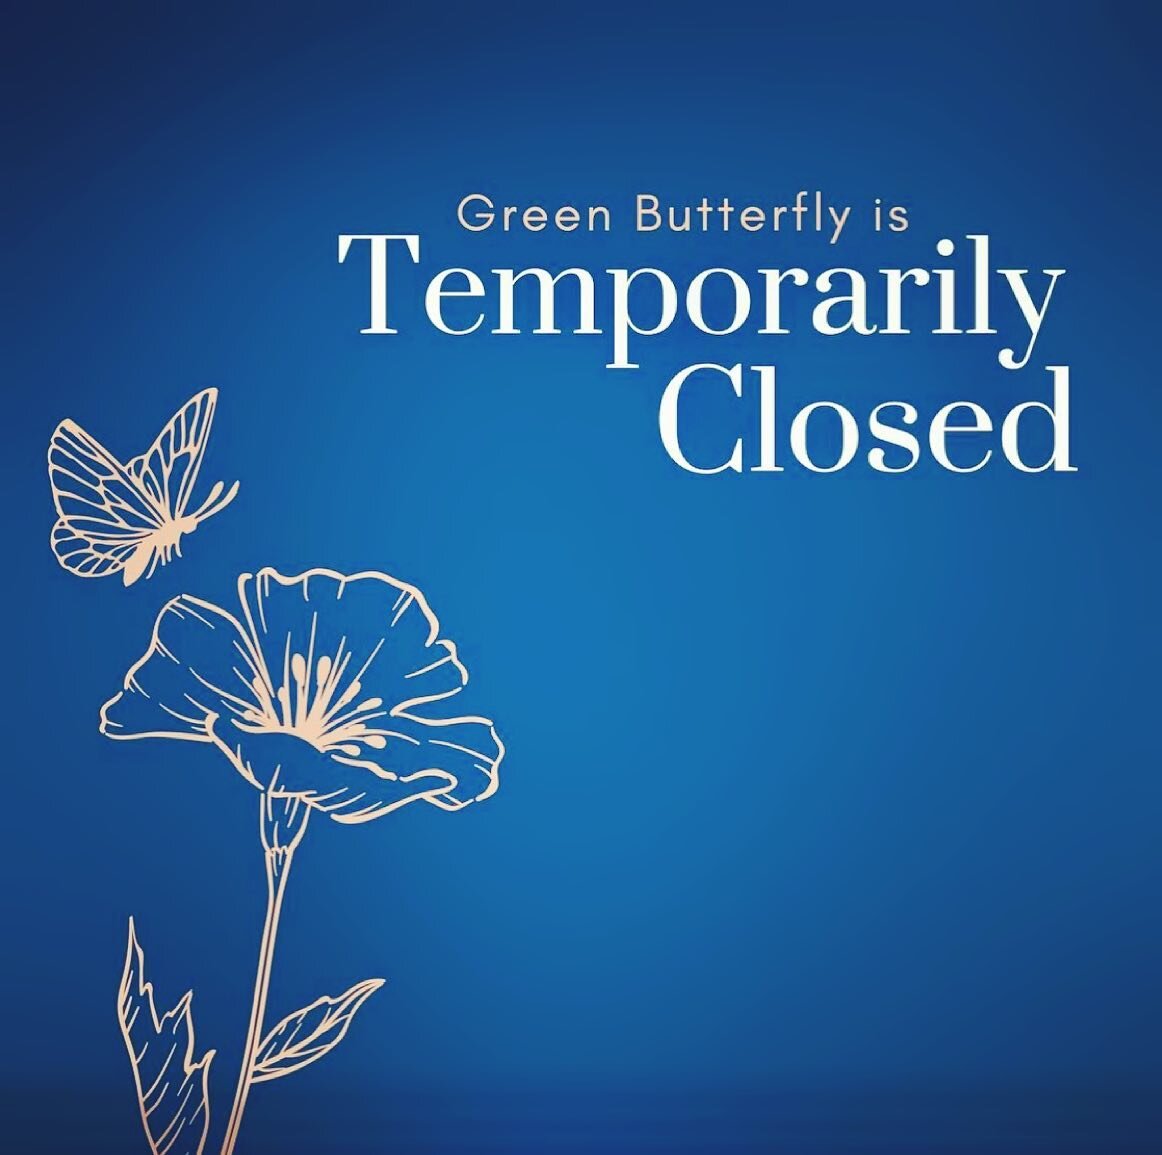 Green Butterfly will be closed until Friday 4th June, due to the current restrictions.
All appointments will be contacted to reschedule as soon as possible.
Thank you for your patience! ❤️
Stay safe, see you all soon !